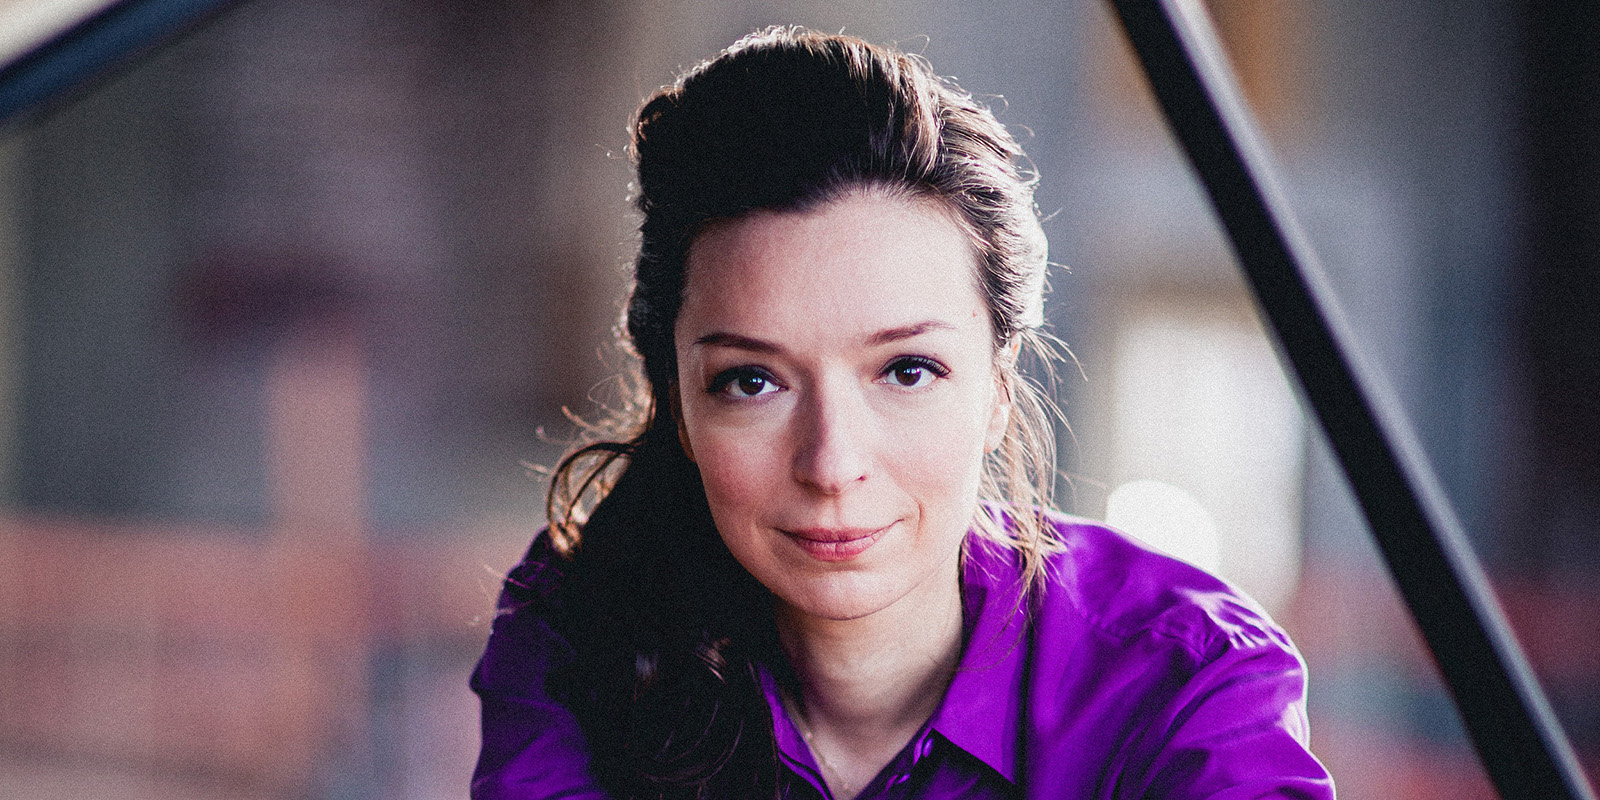 A woman with long brown hair wears a purple shirt and sits at a black piano.